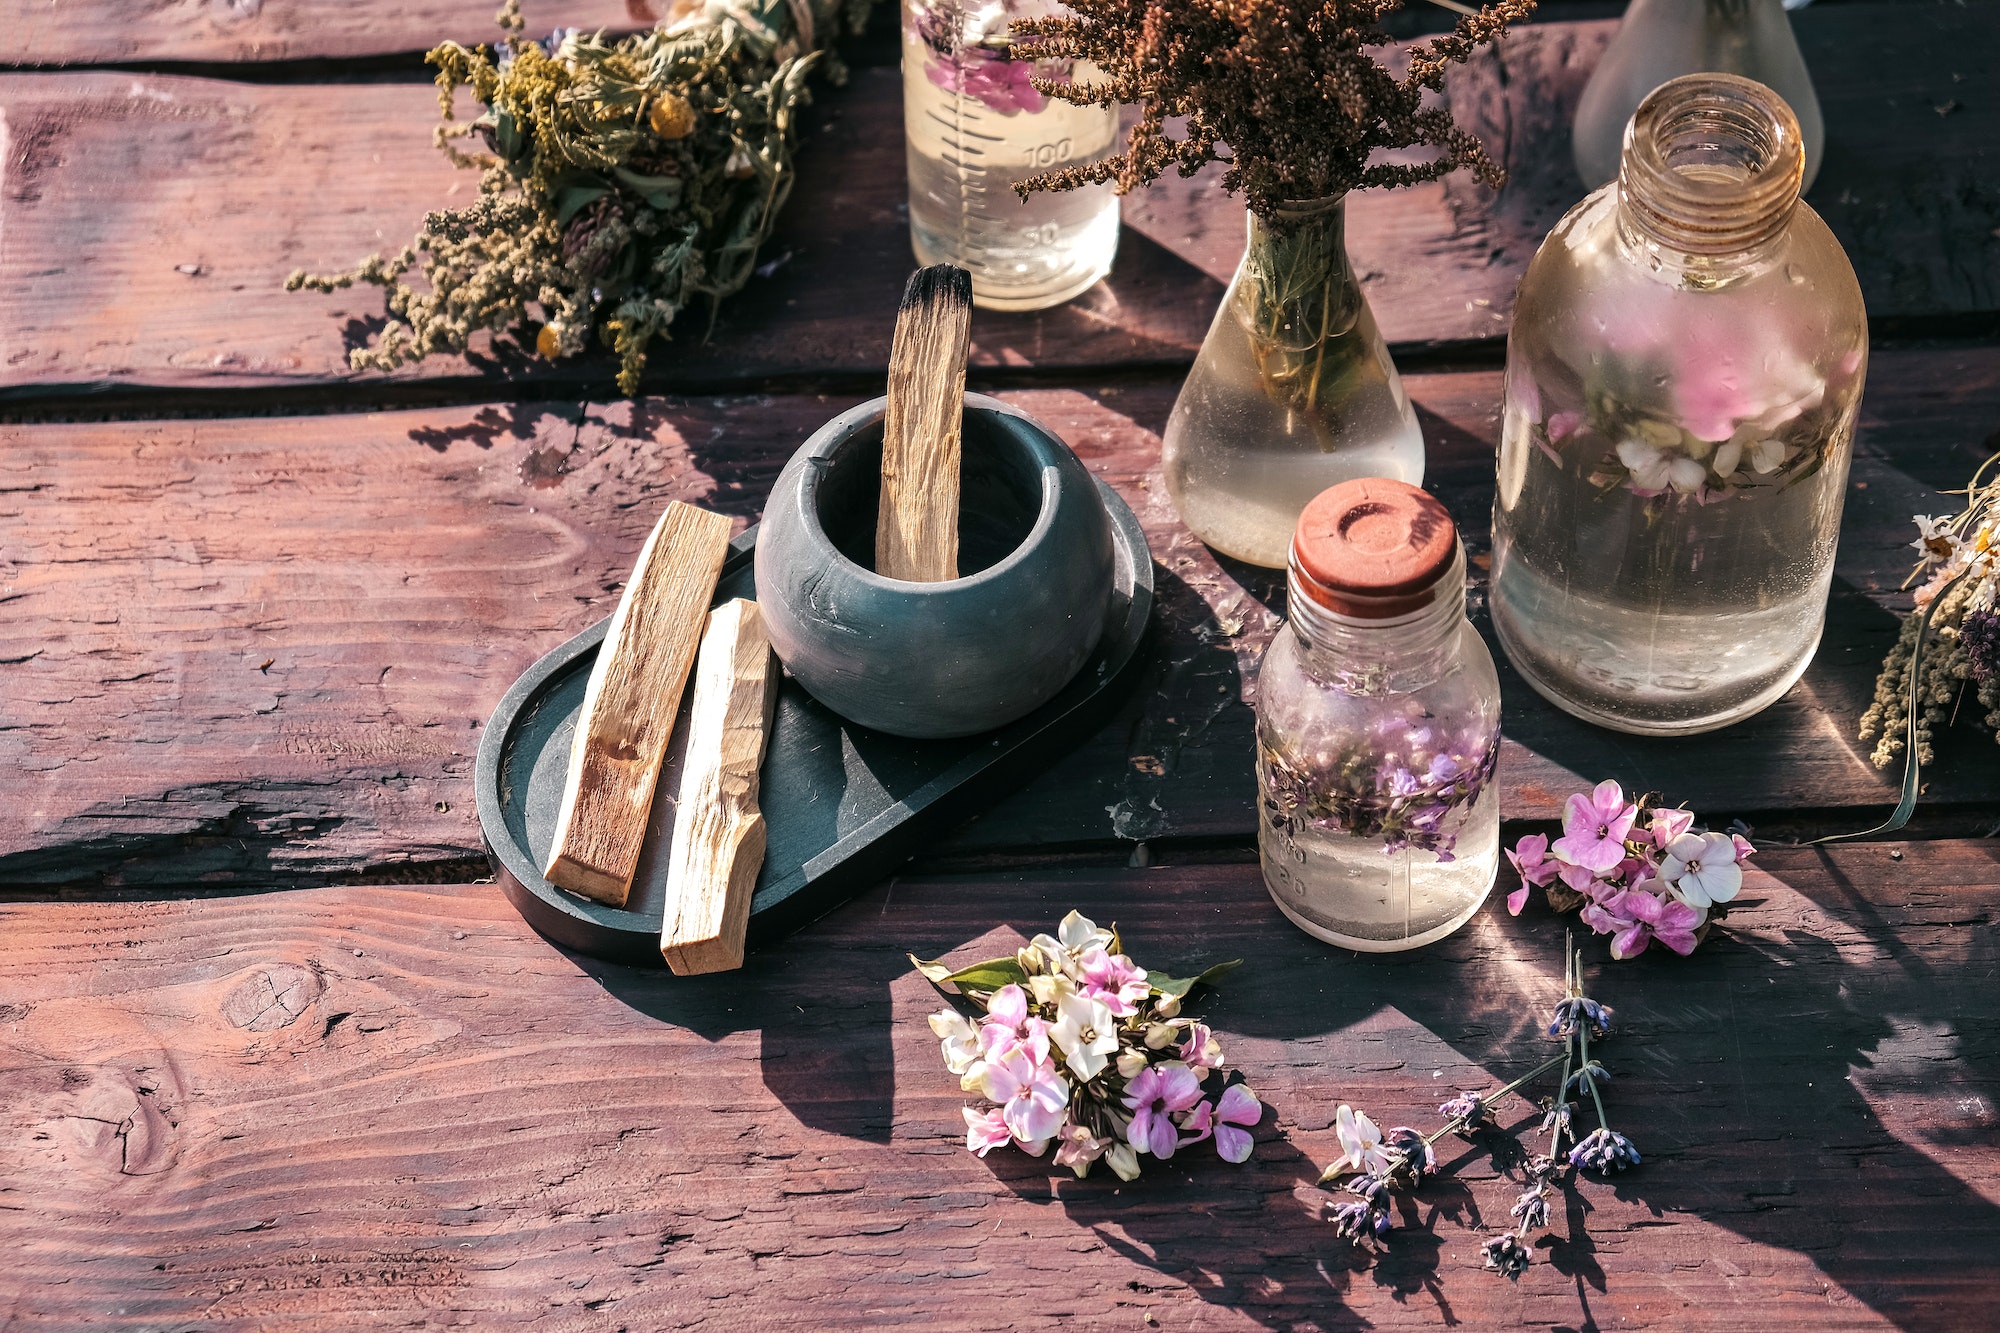 Aromatherapy,esotericism,occultism,herbal gathering and drying,aesthetic herbal pharmacy,organic alt